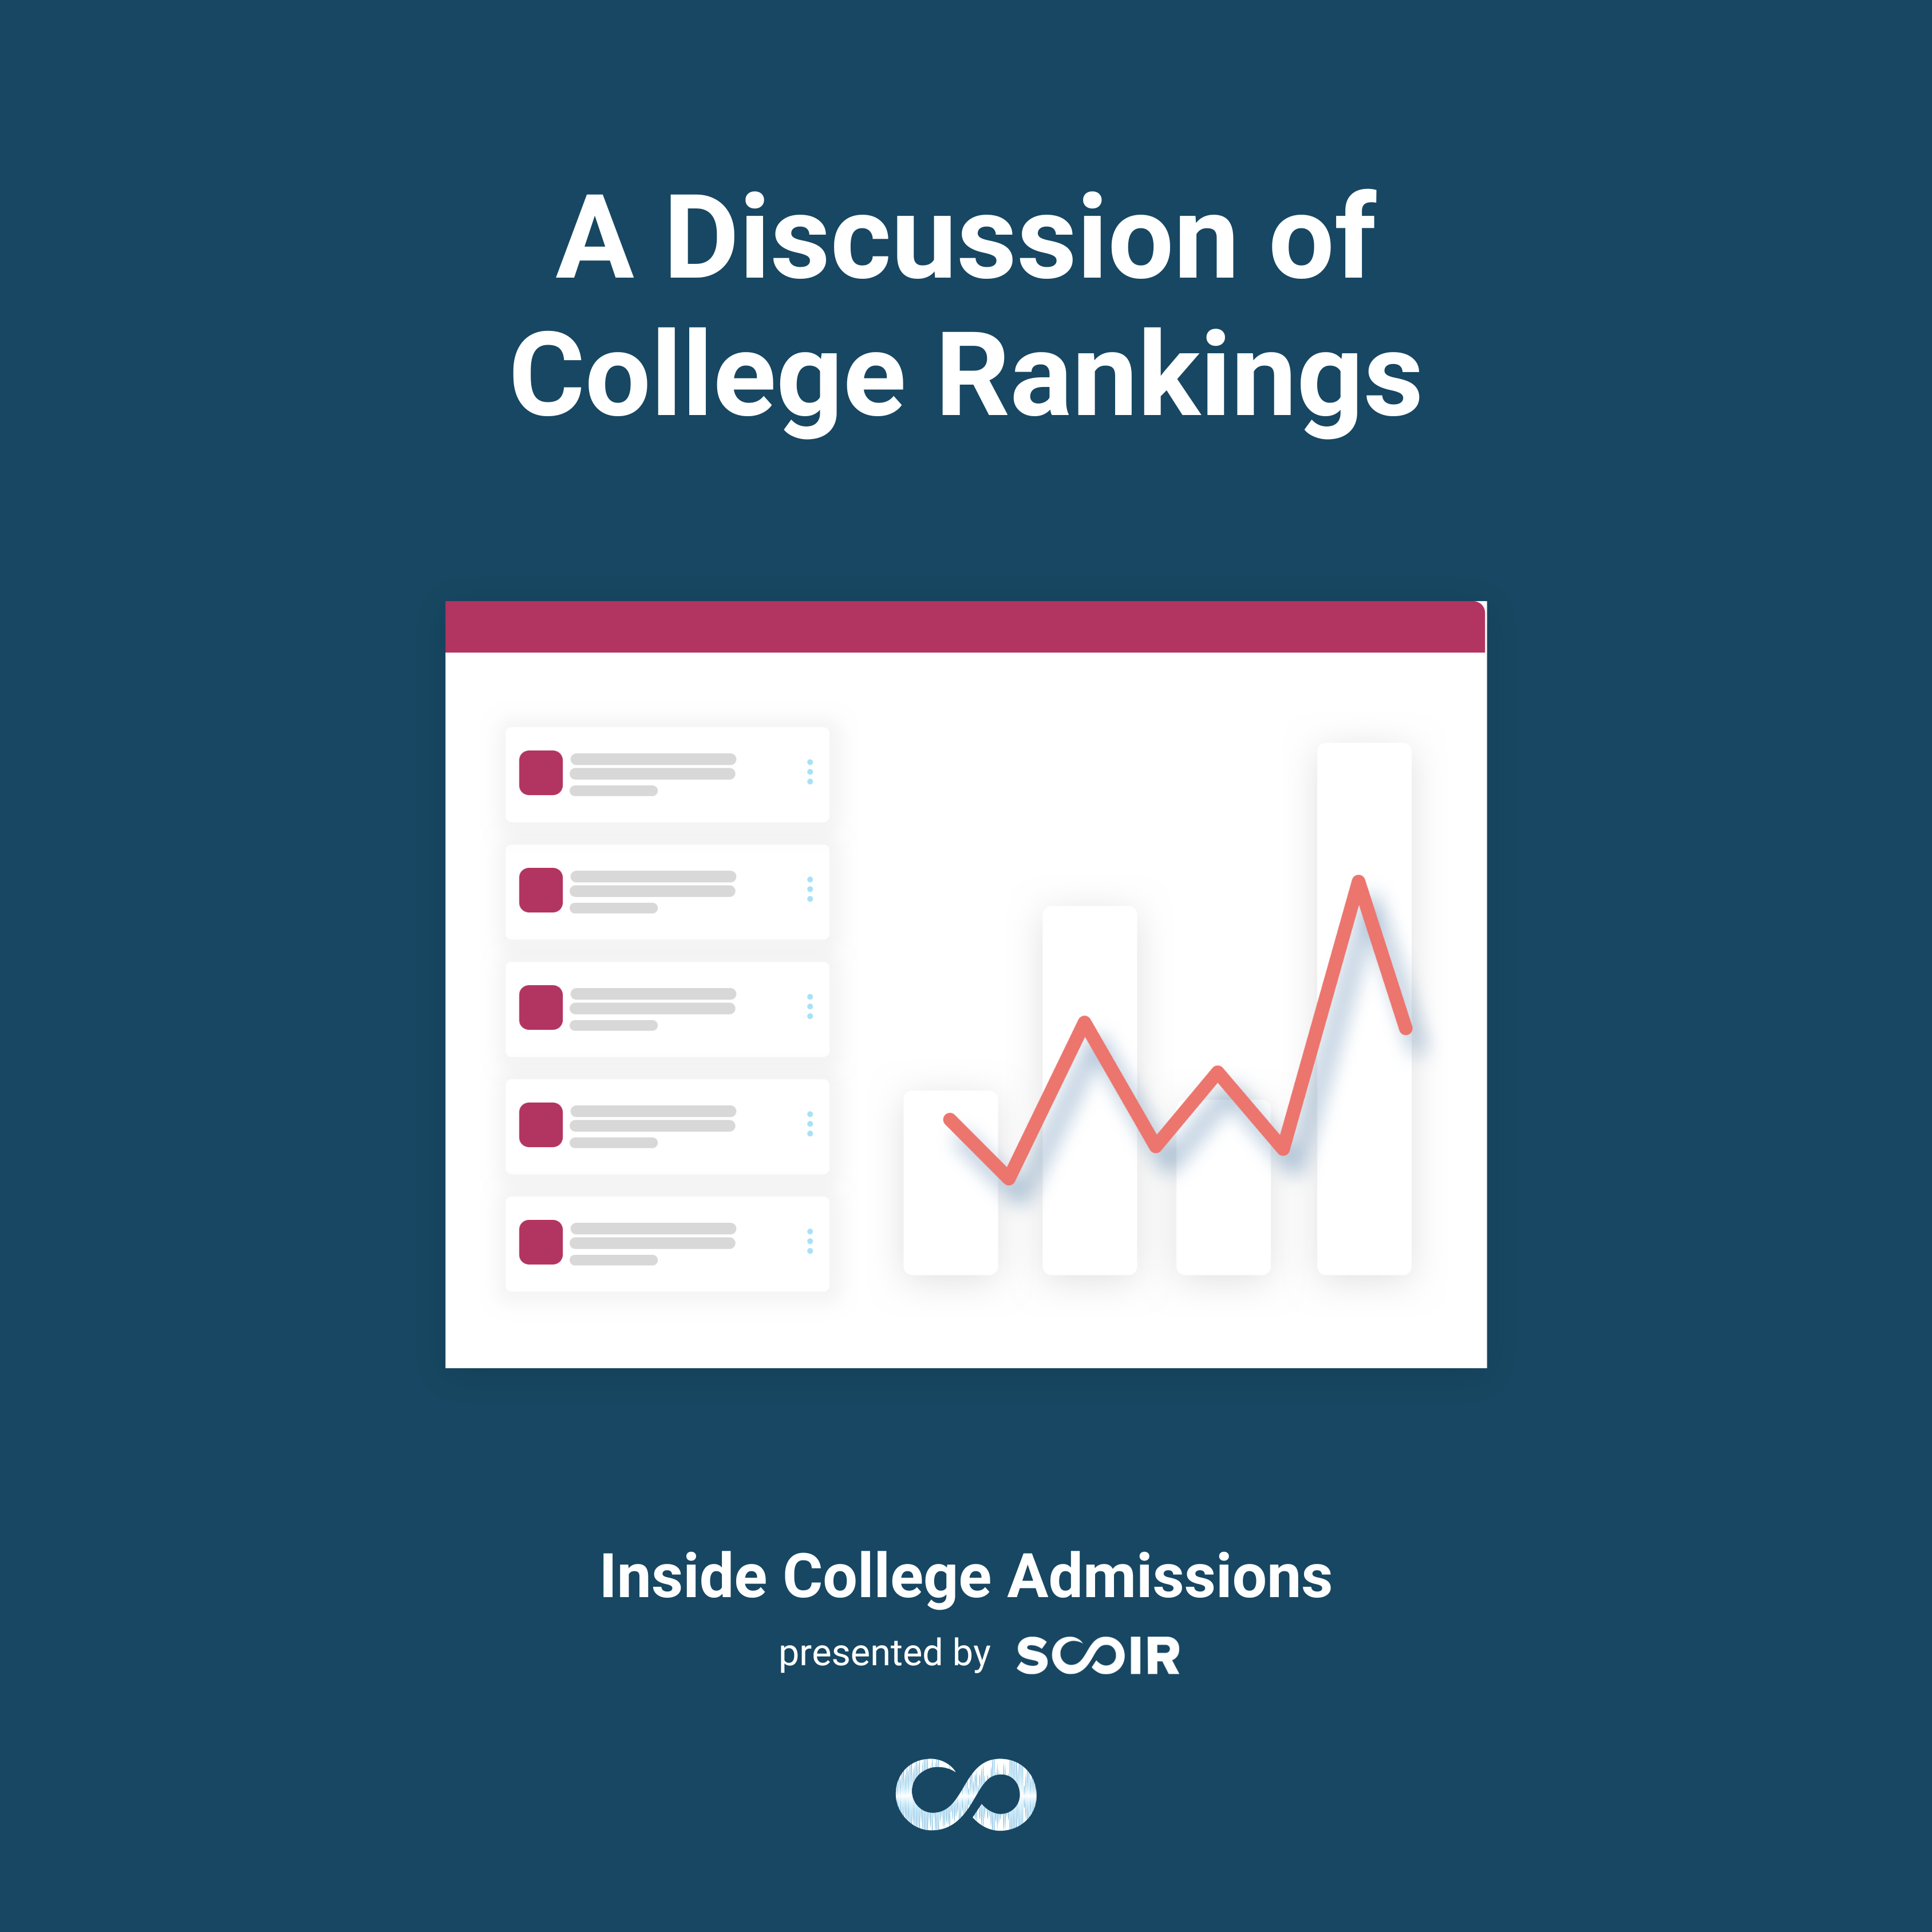 A Discussion of College Rankings